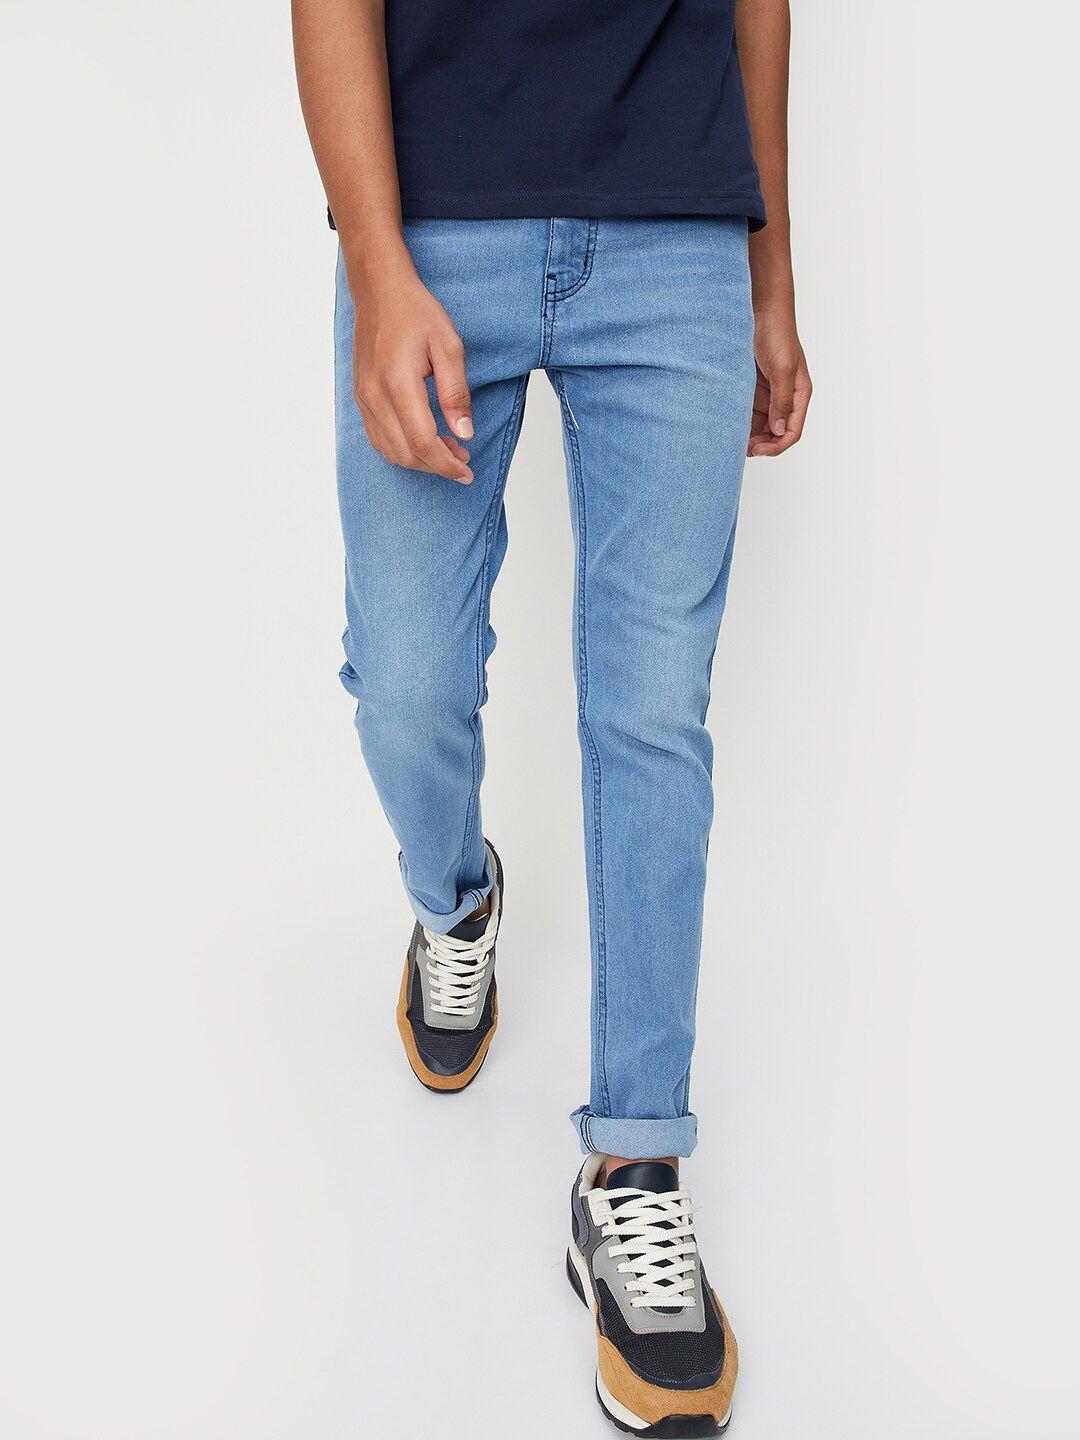 max boys mildly distressed light fade jeans